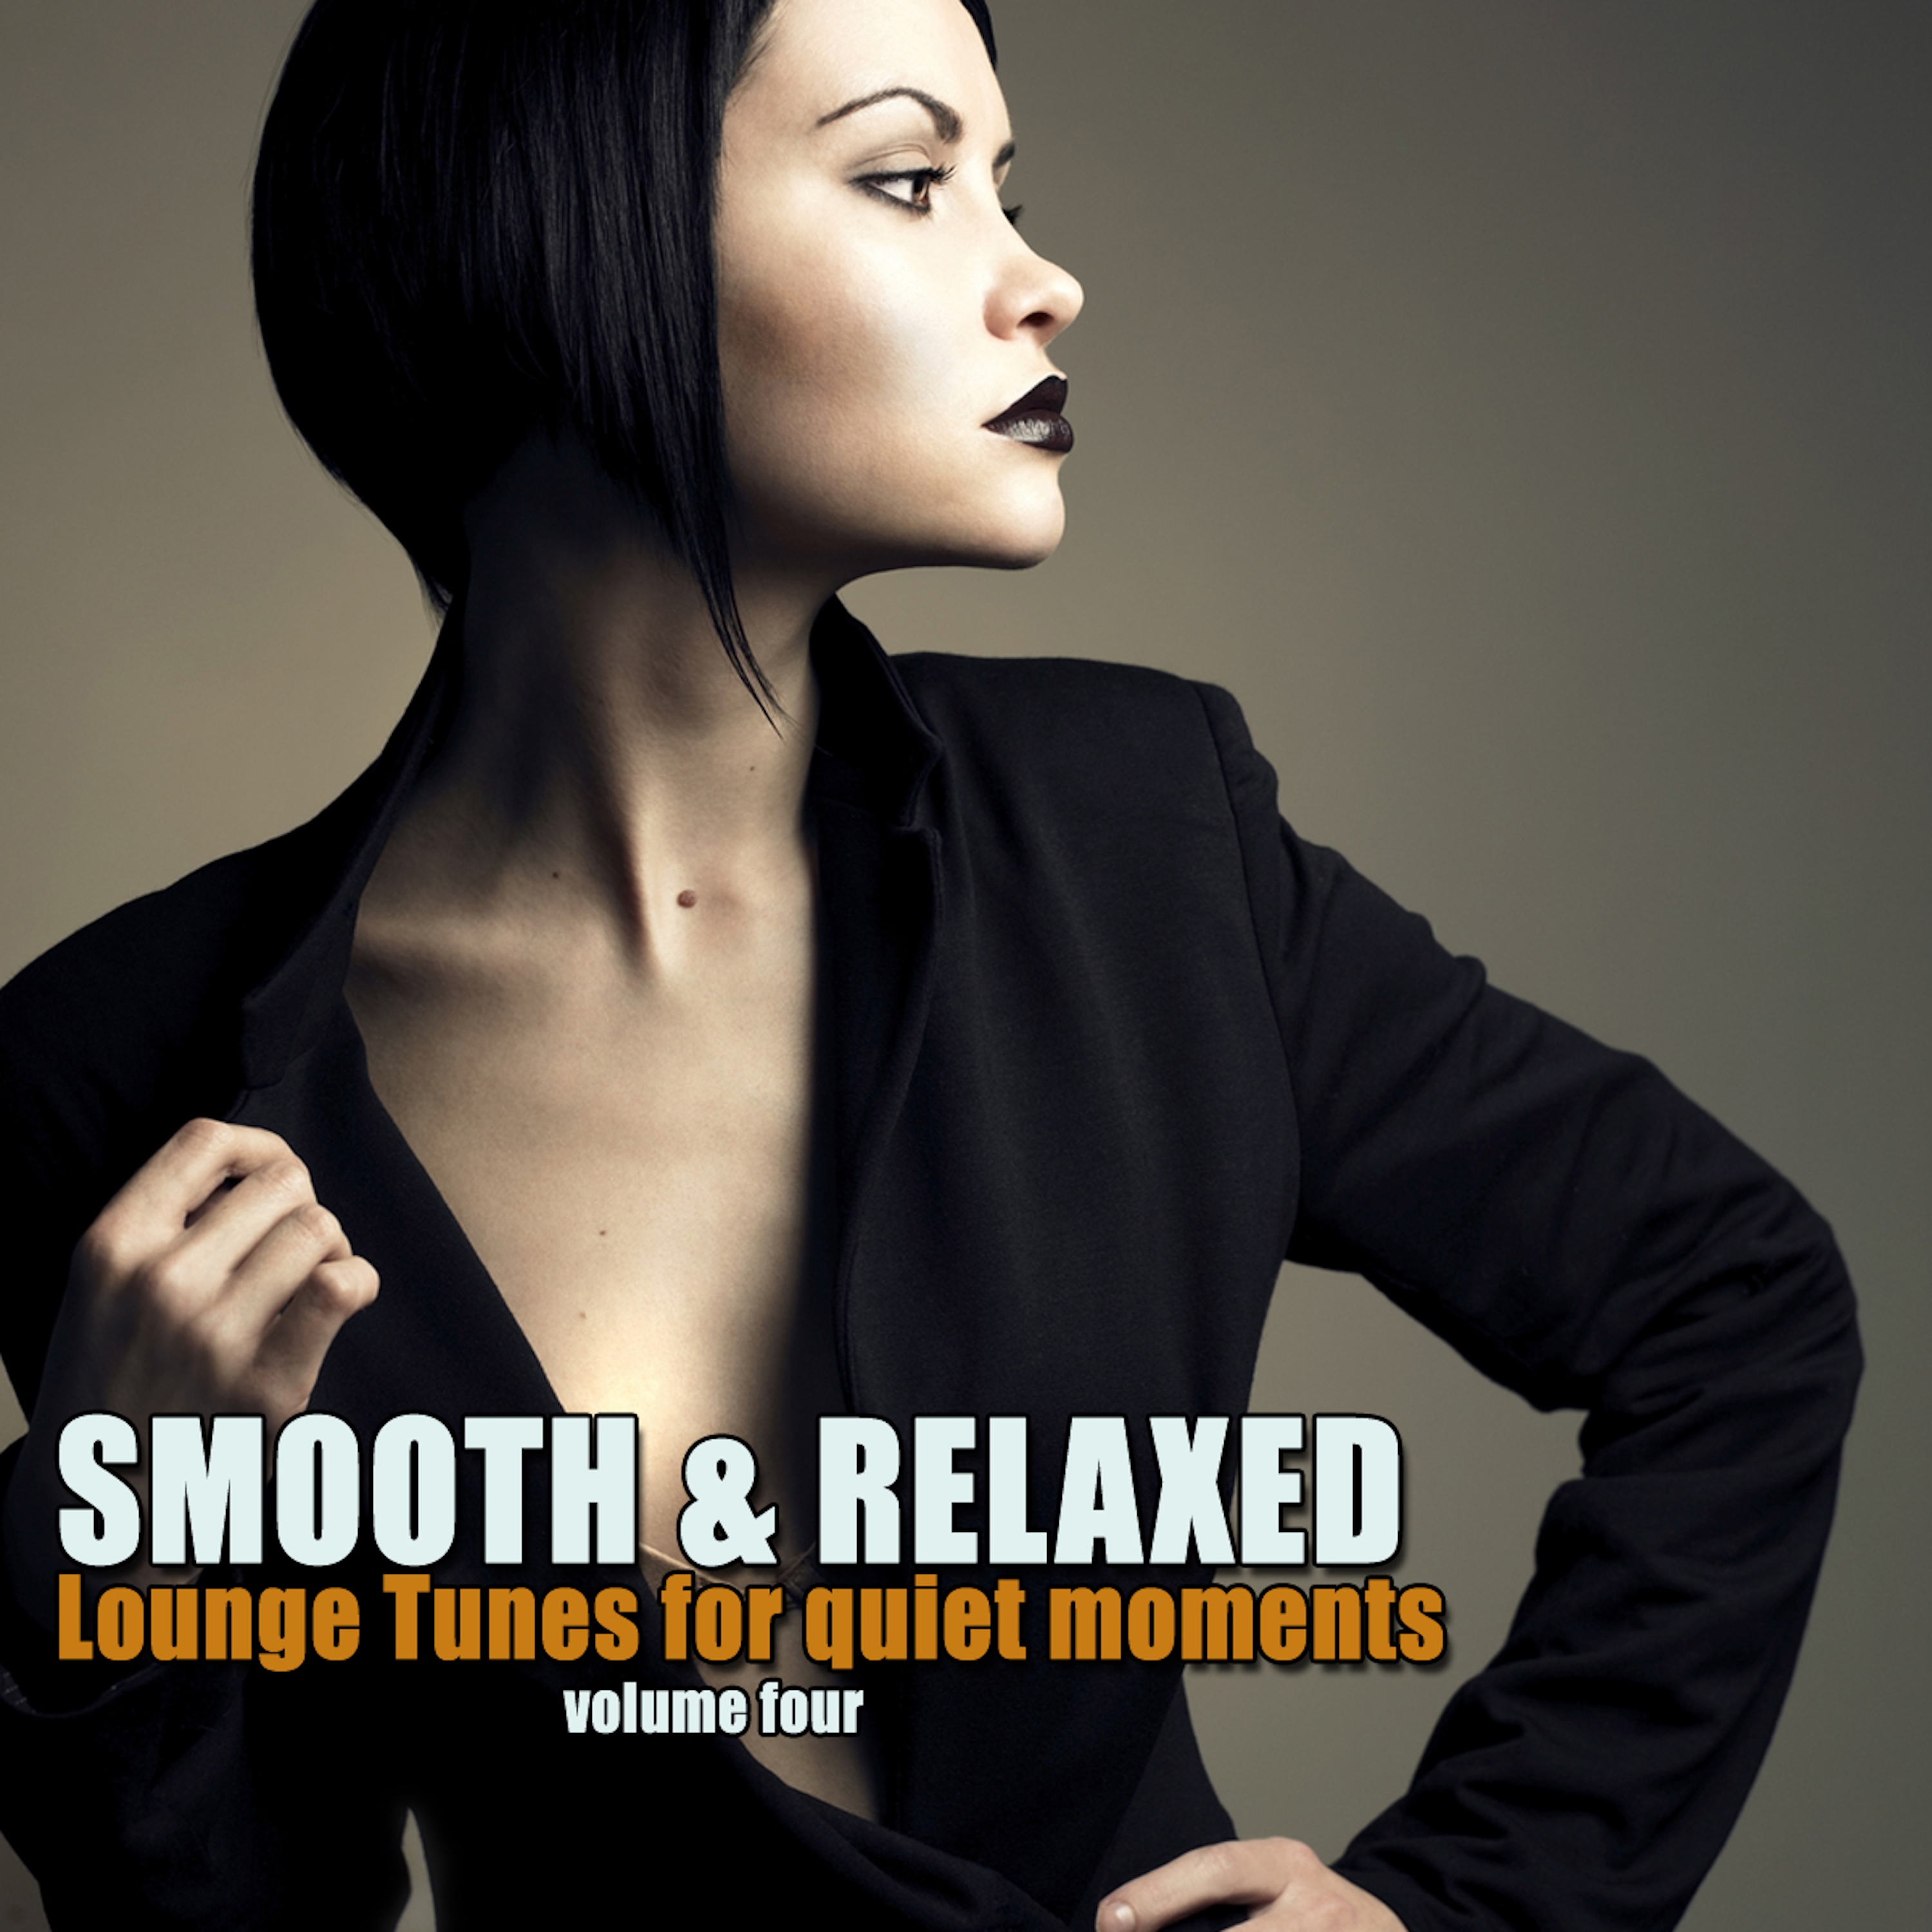 Smooth & Relaxed Vol. 4 - Lounge Tunes For Quiet Moments